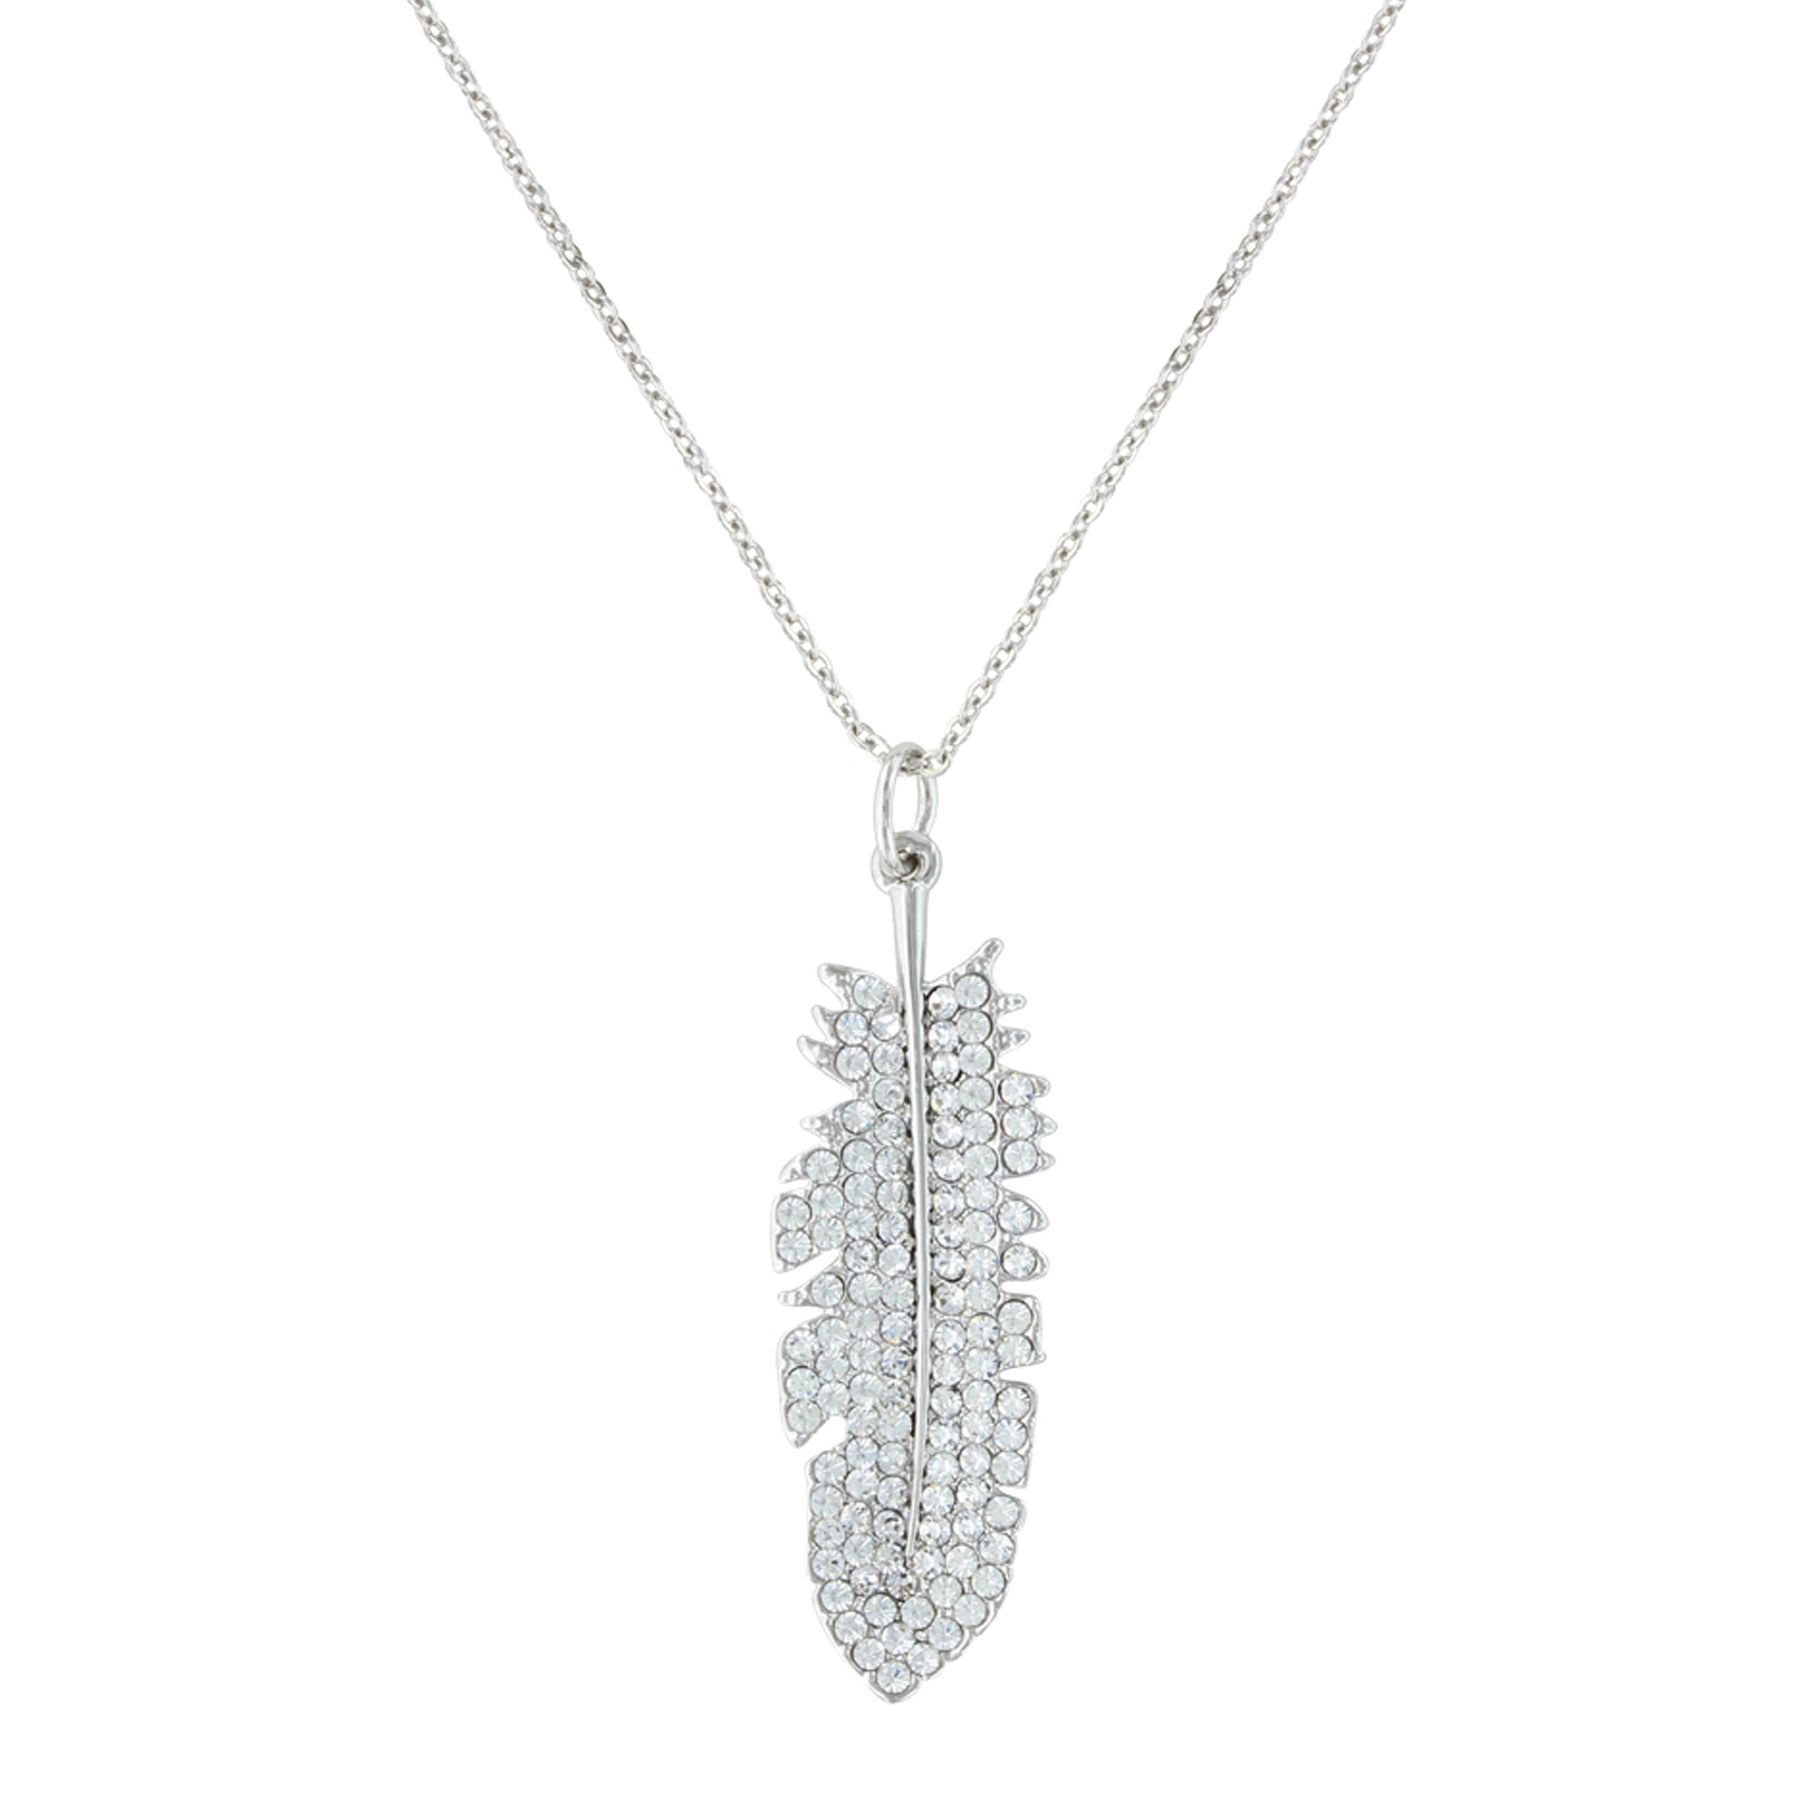 Montana Silversmiths Shimmering Feather Necklace (nc3374cz Intended For Most Popular Shimmering Feather Pendant Necklaces (View 2 of 25)